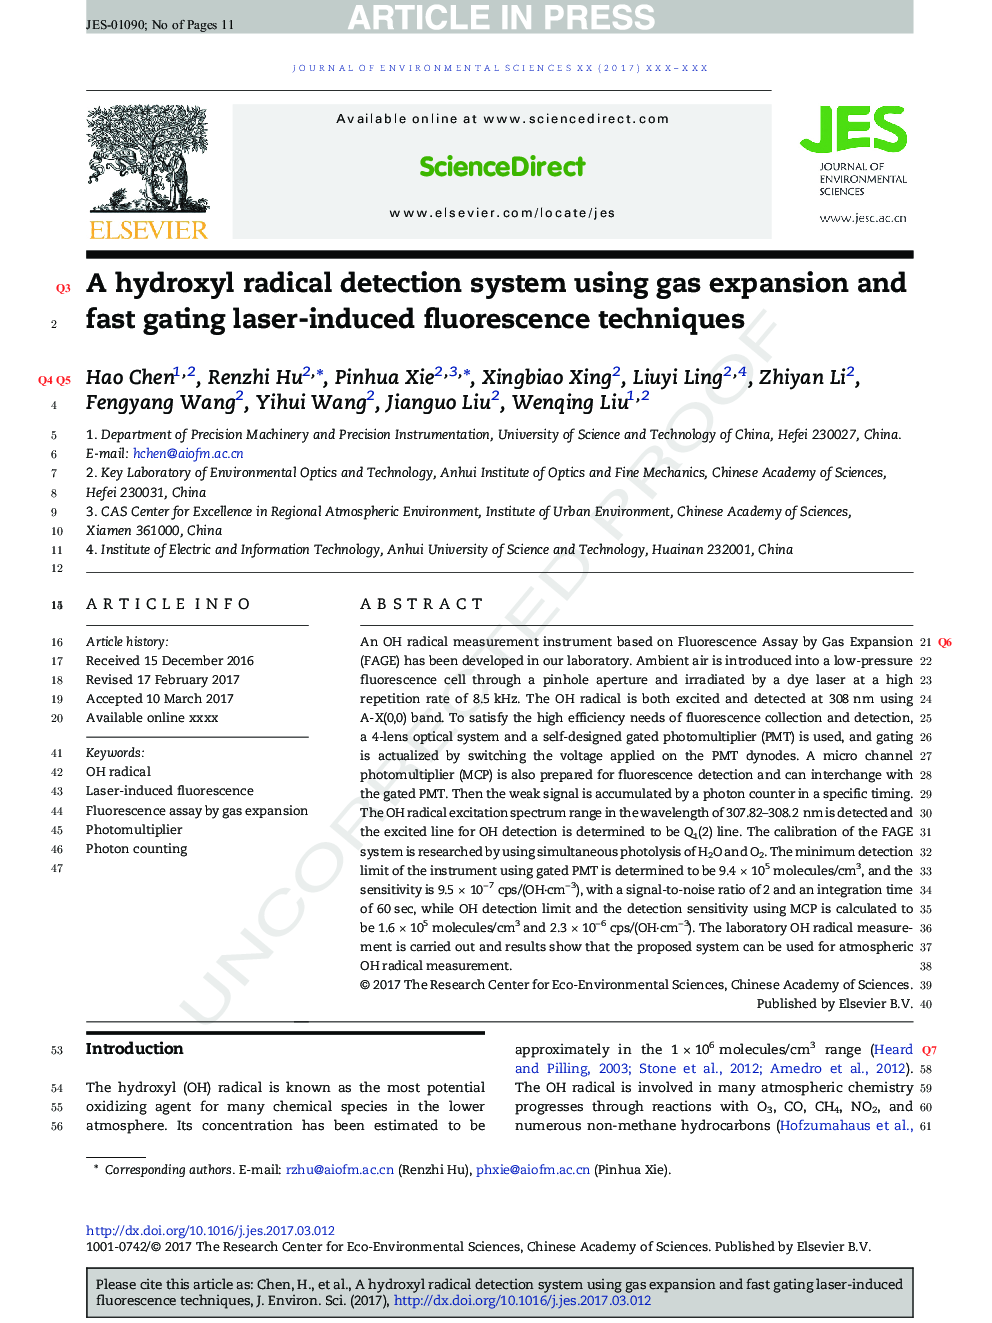 A hydroxyl radical detection system using gas expansion and fast gating laser-induced fluorescence techniques